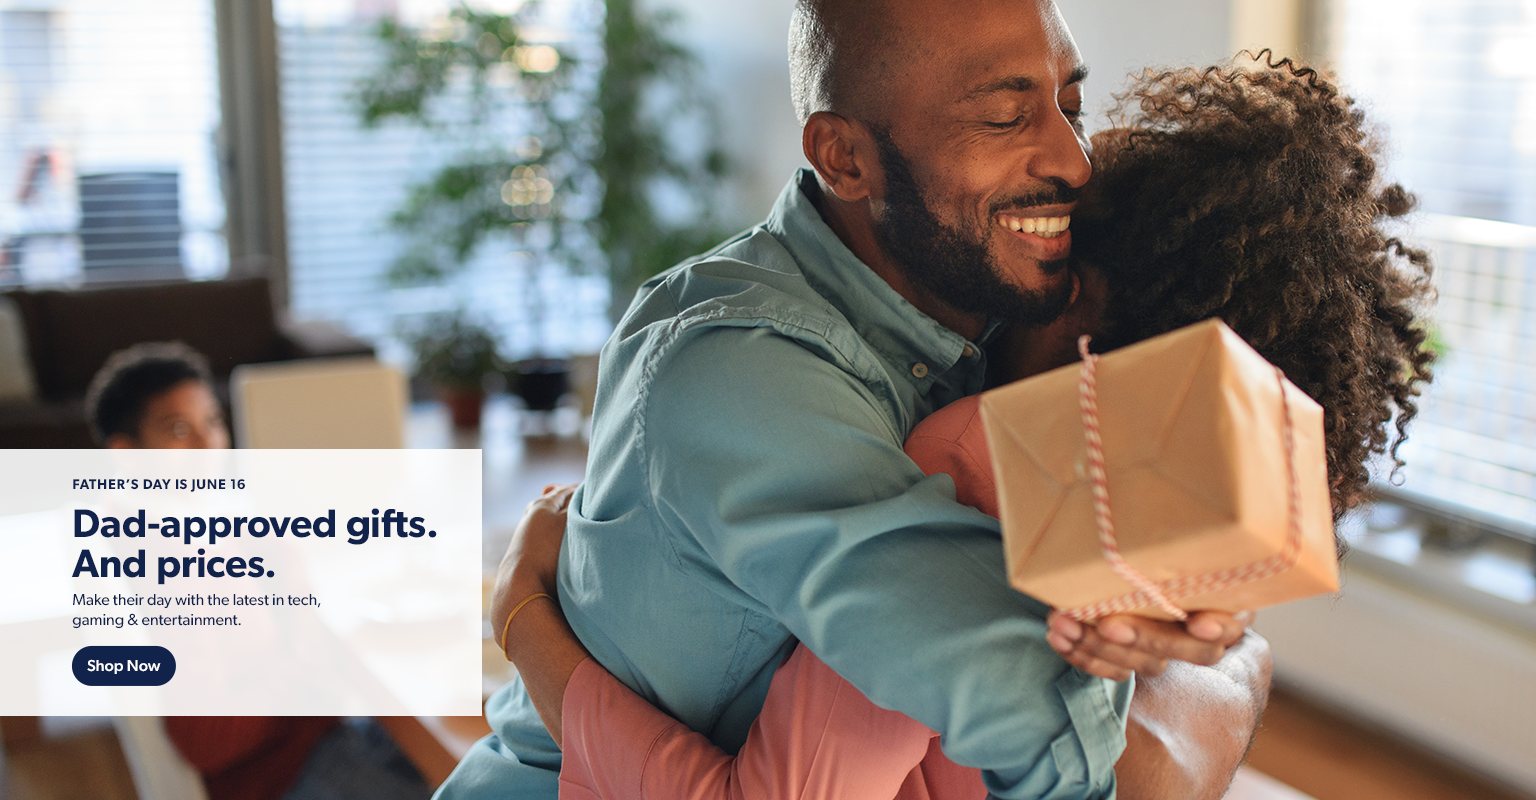 Father’s Day is June 16. Get dad-approved prices on the latest tech, gaming and entertainment. Shop now.